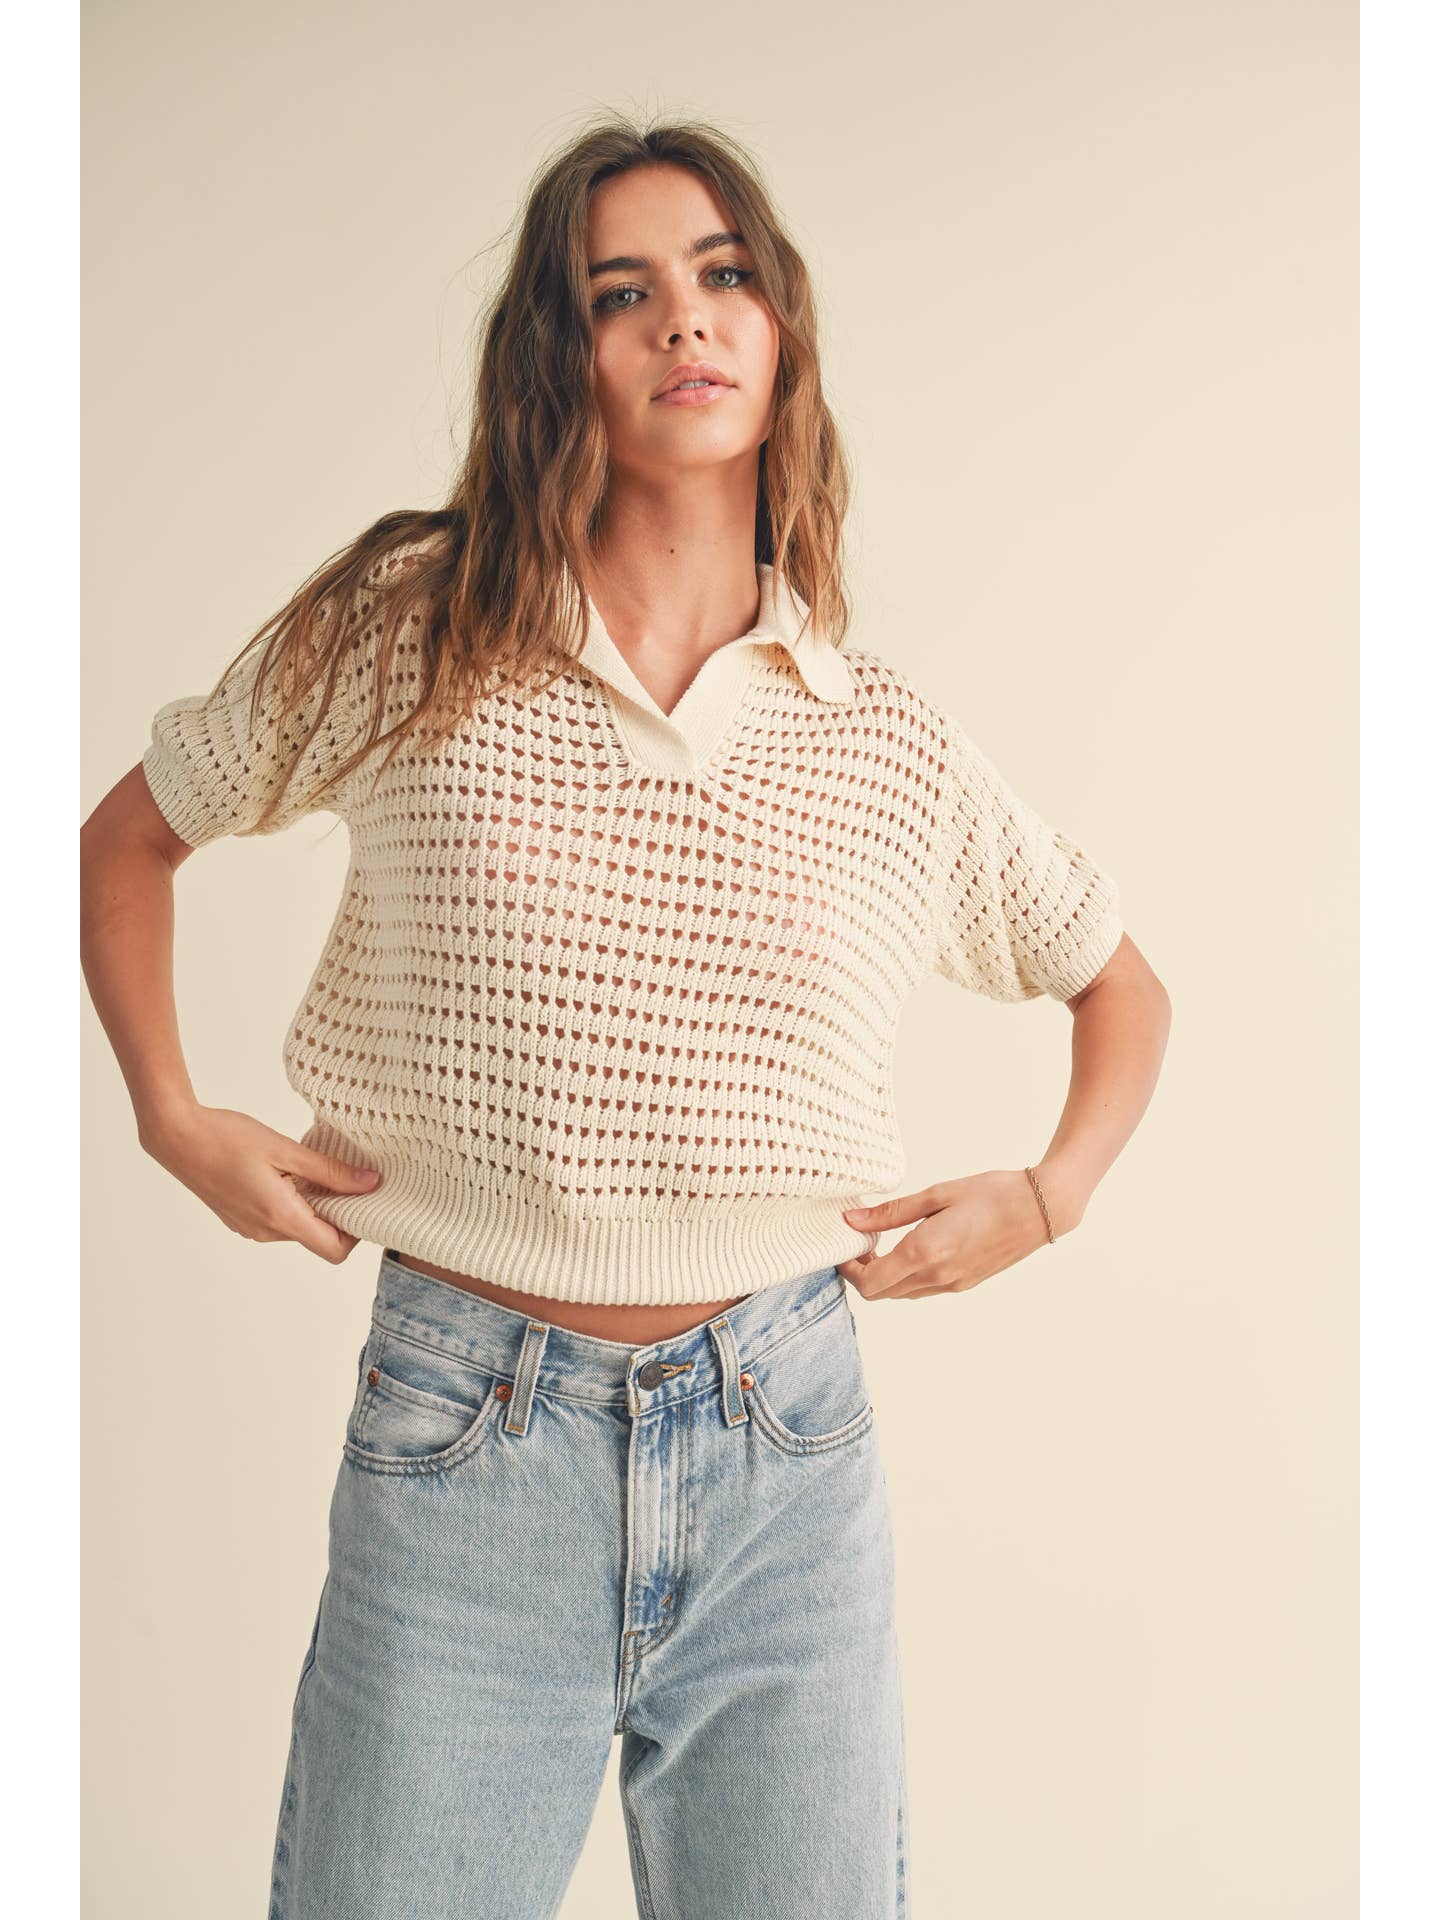 Crochet Collared Top (3 Colors)